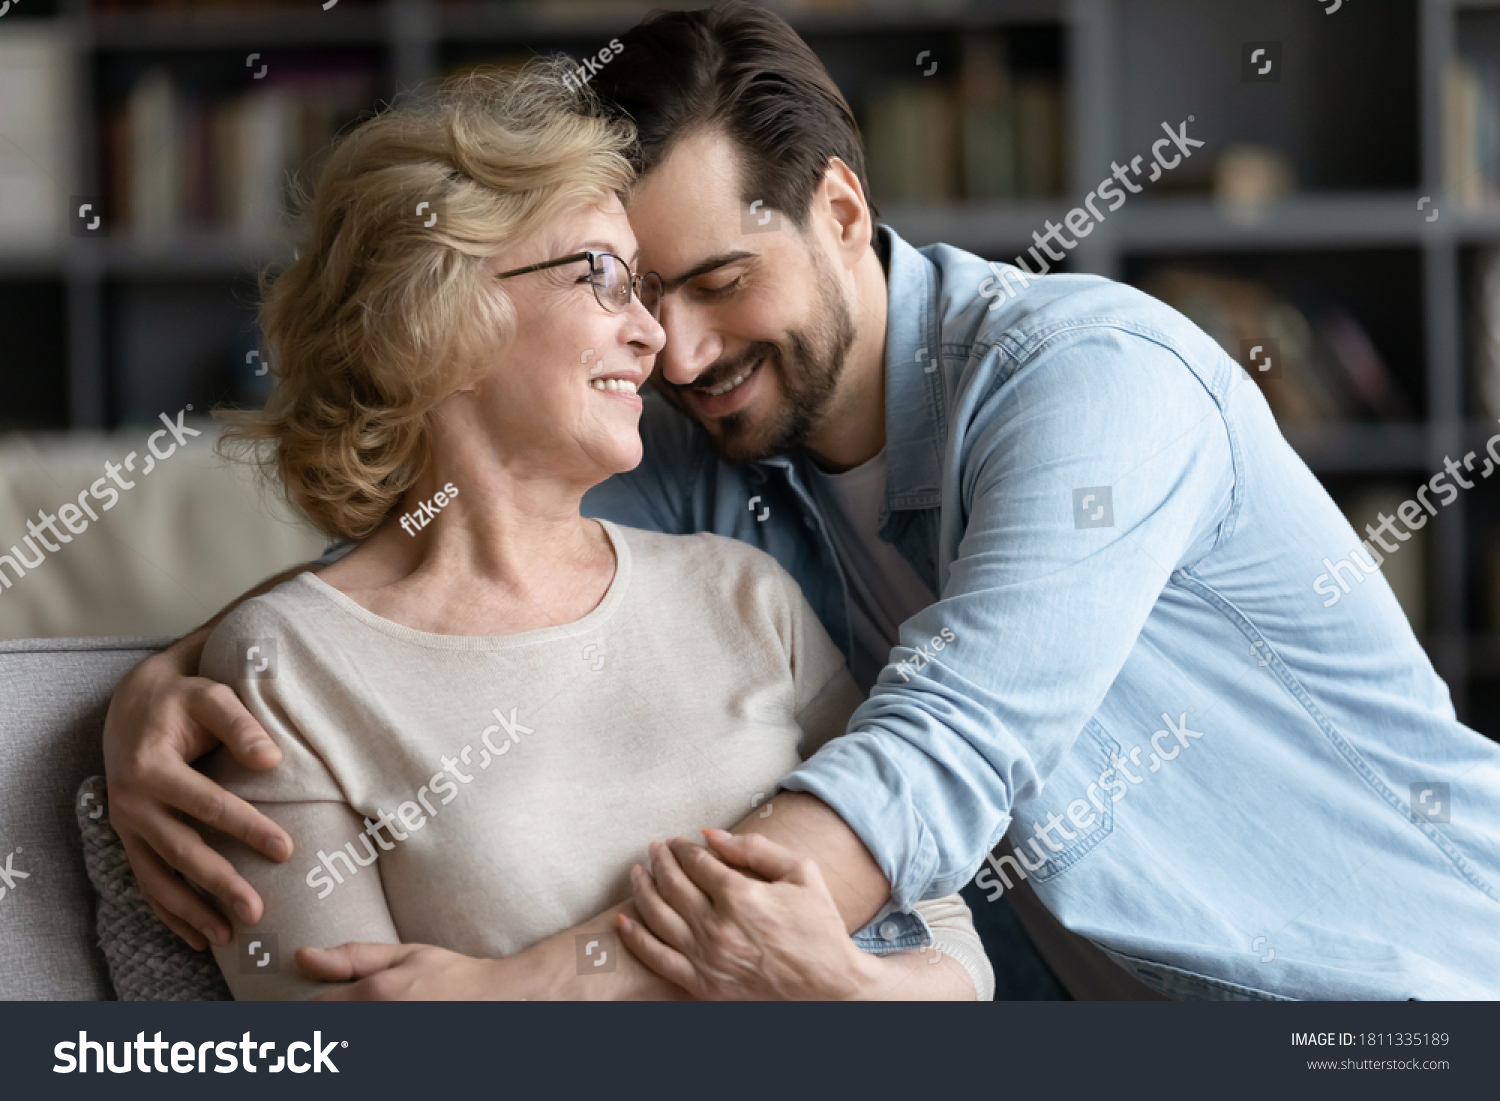 Smiling mature woman and adult son cuddling, enjoying tender moment, sitting on cozy couch in living room, happy beautiful elderly mother wearing glasses and young man hugging, two generations #1811335189